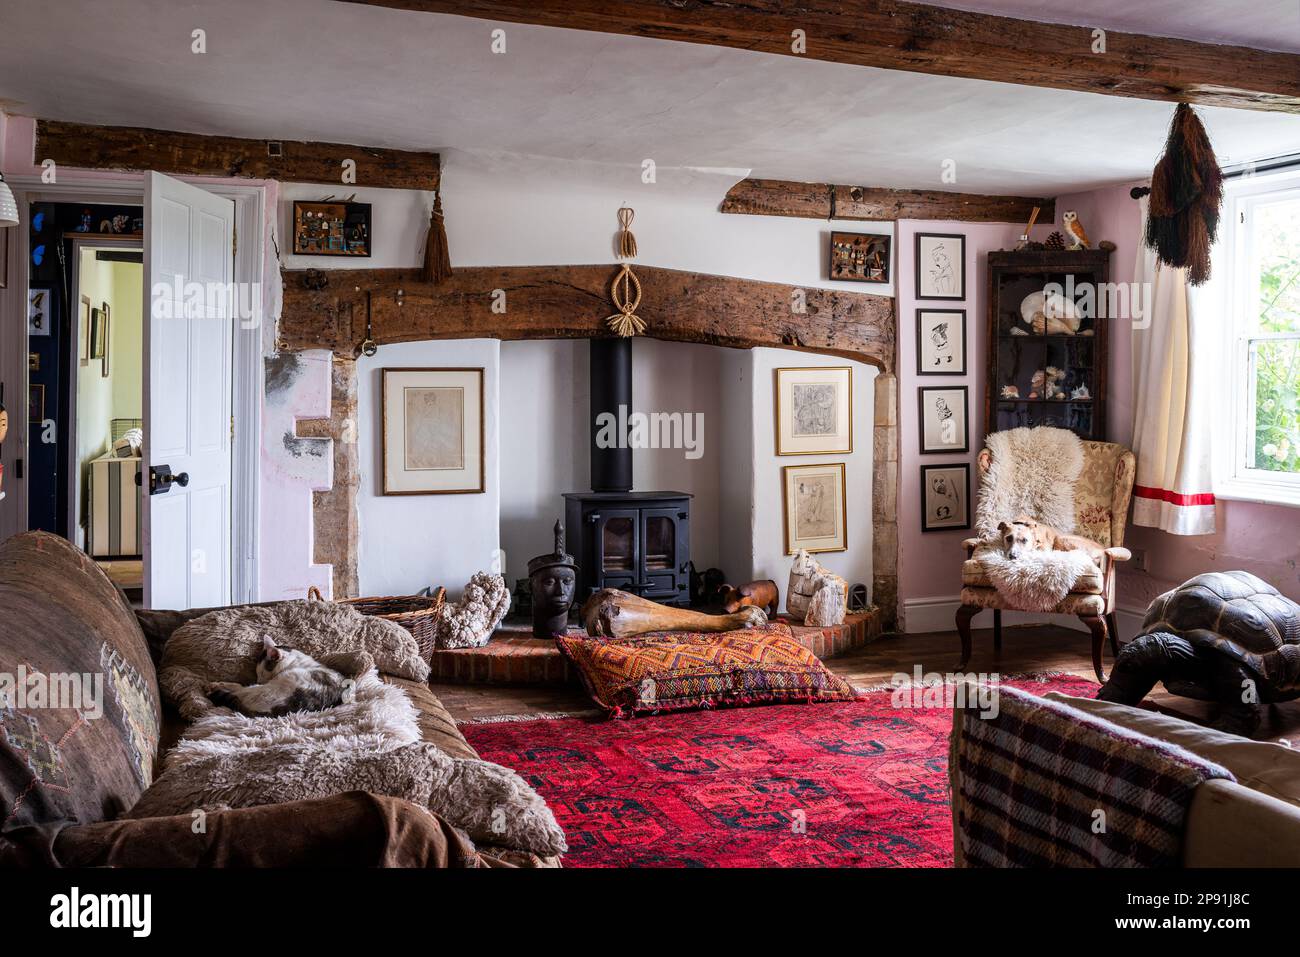 Mixed styles and collectables in living room of 16th century Tudor farmhouse, Suffolk, UK. Stock Photo